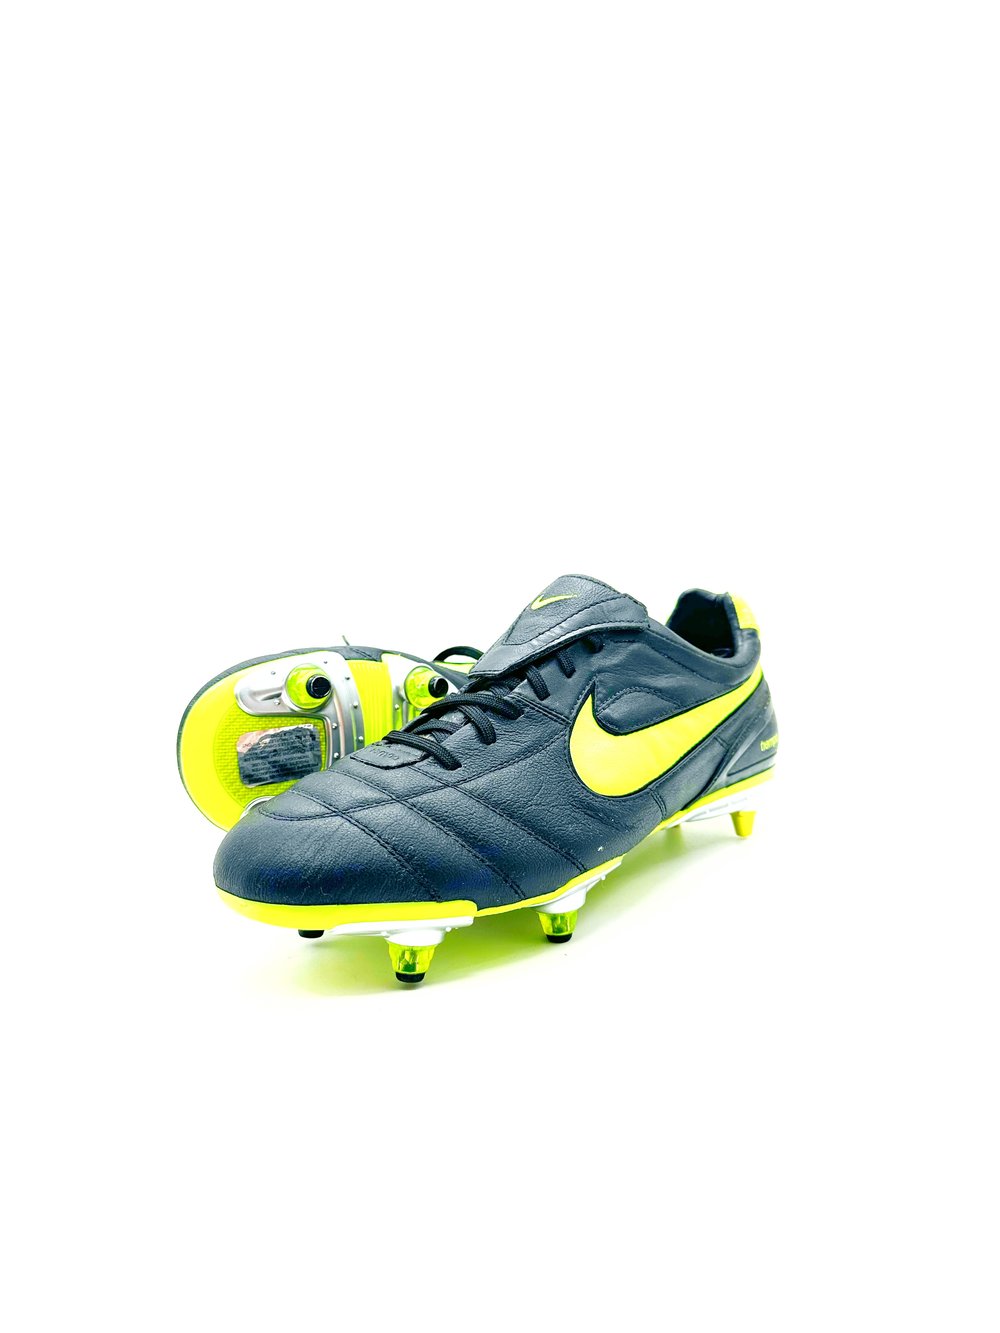 Image of Nike Tiempo Legend SG Electric 